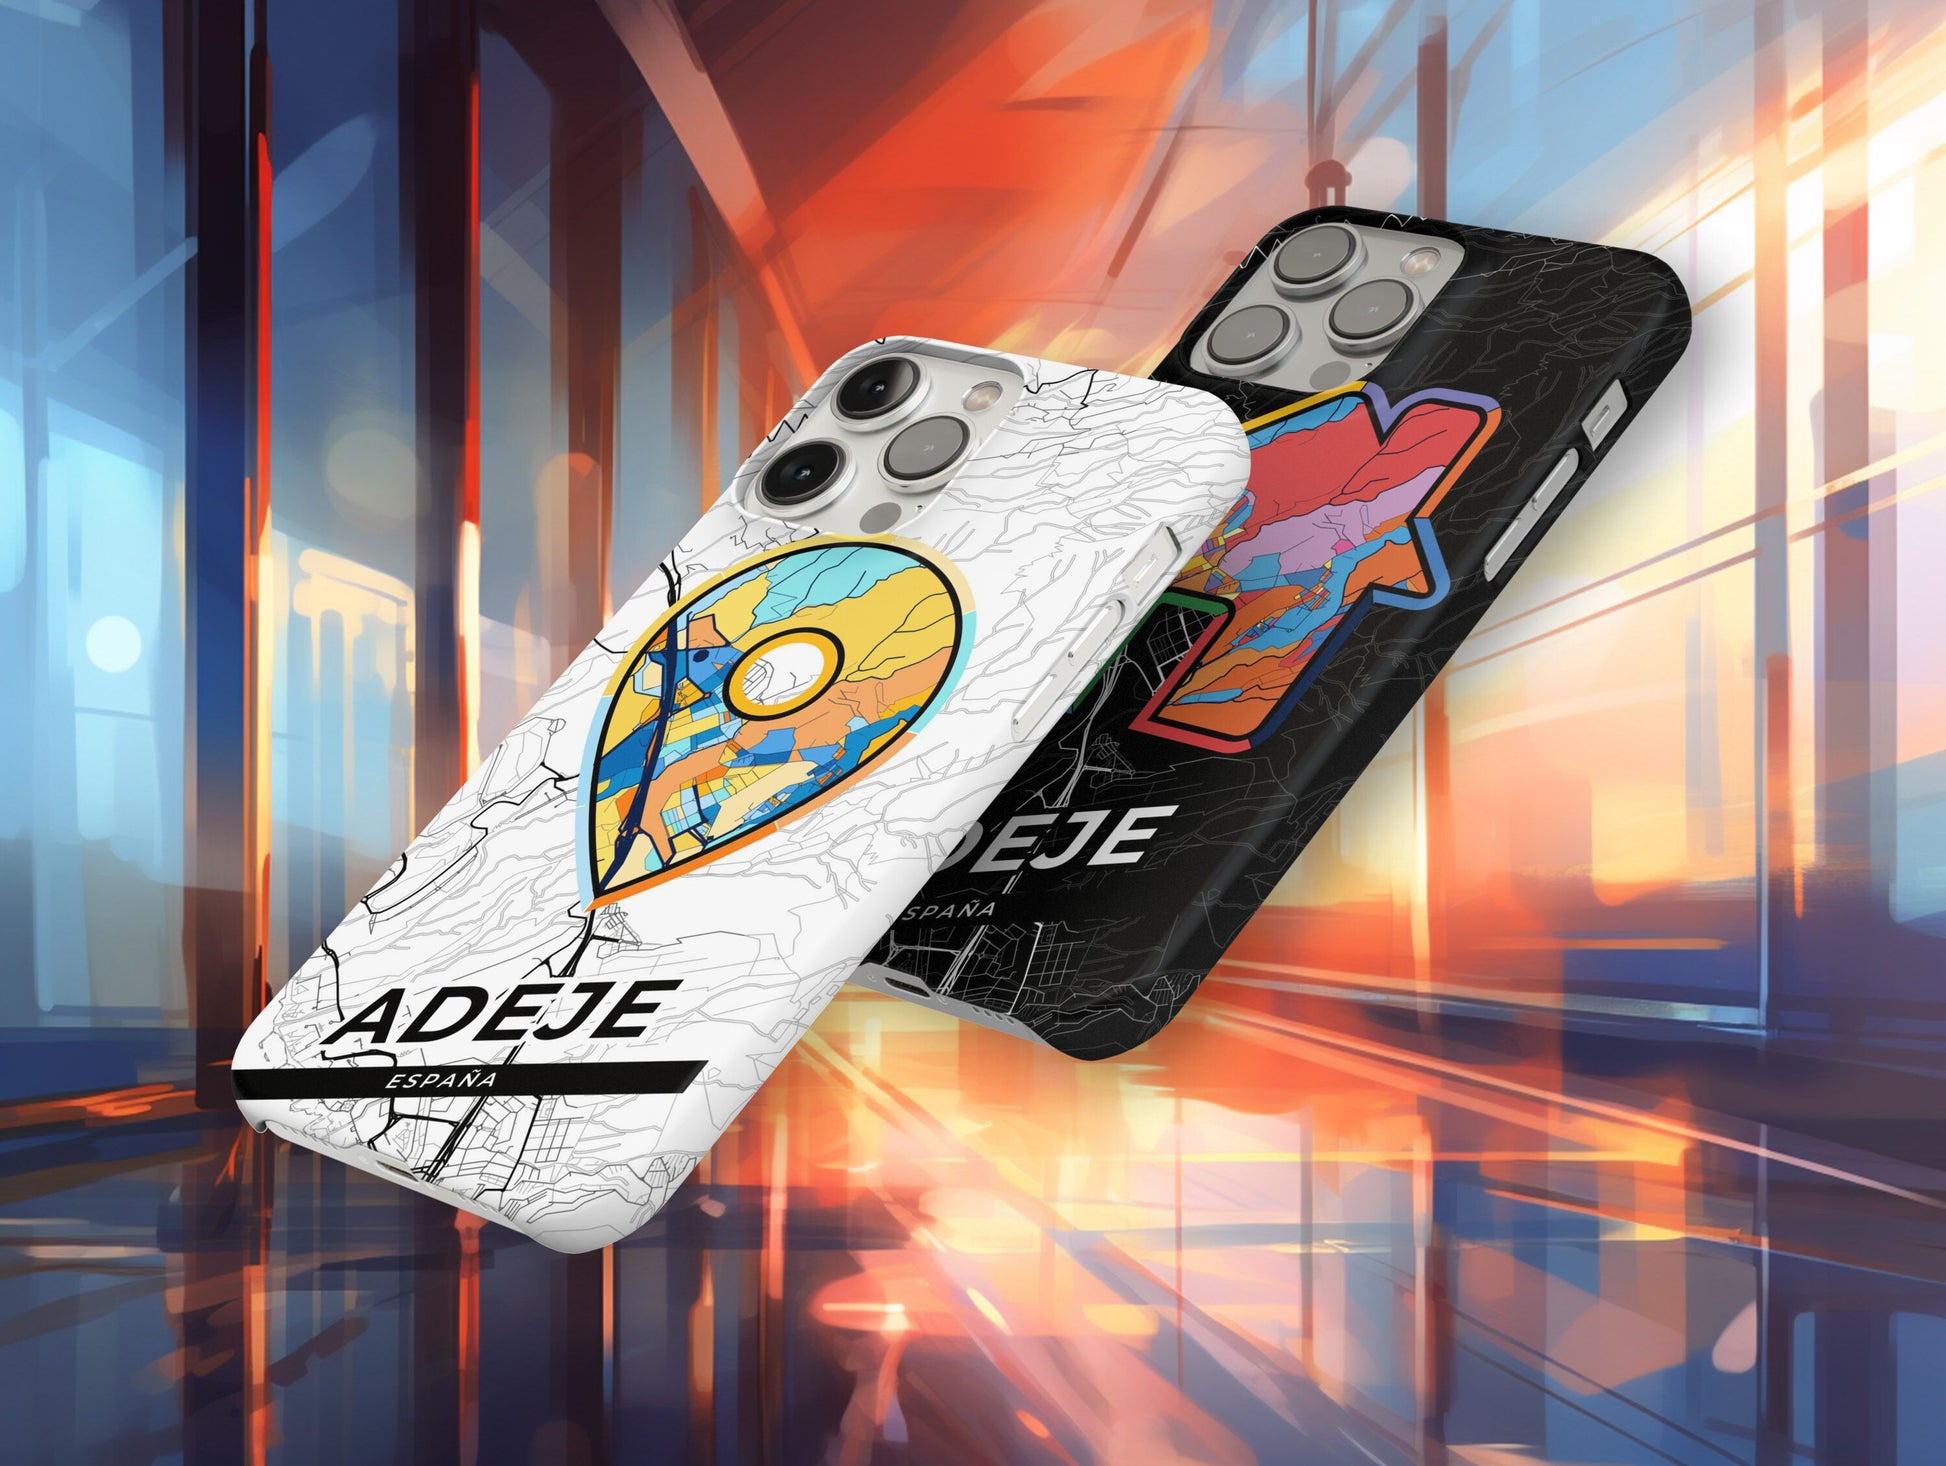 Adeje Spain slim phone case with colorful icon. Birthday, wedding or housewarming gift. Couple match cases.